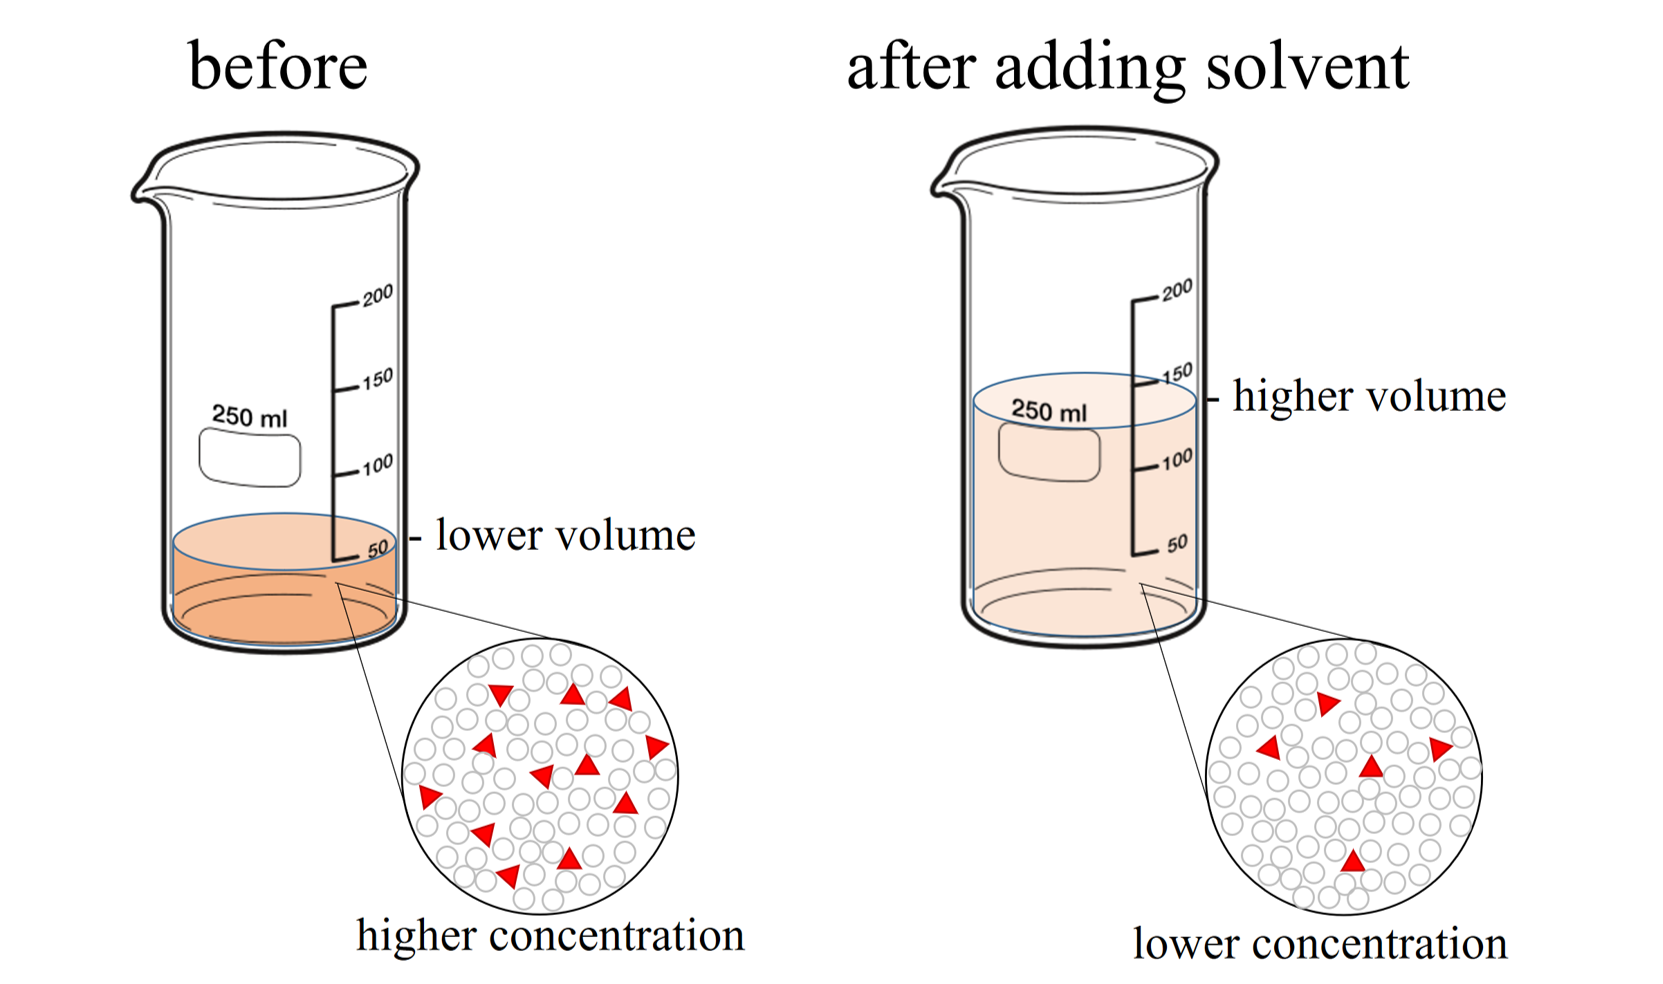 This image shows a solution before and after dilution, i.e. adding solvent. Through the dilution process, the volume increases and the concentrations of the solutes decrease. As a consequence, there is more solution in the beaker after dilution, and the color of the solution becomes fainter. The inset shows that at the particular level (picometer to nanometer scale), there are less solute particles (red triangles) per volume. The content in the central box shows the dilution law, i.e. that the product of concentration and volume stays constant upon dilution. The picture of the beakers are from https://www.1001freedownloads.com/free-clipart/beakers with a CC0 1.0 Universal (CC0 1.0) license.